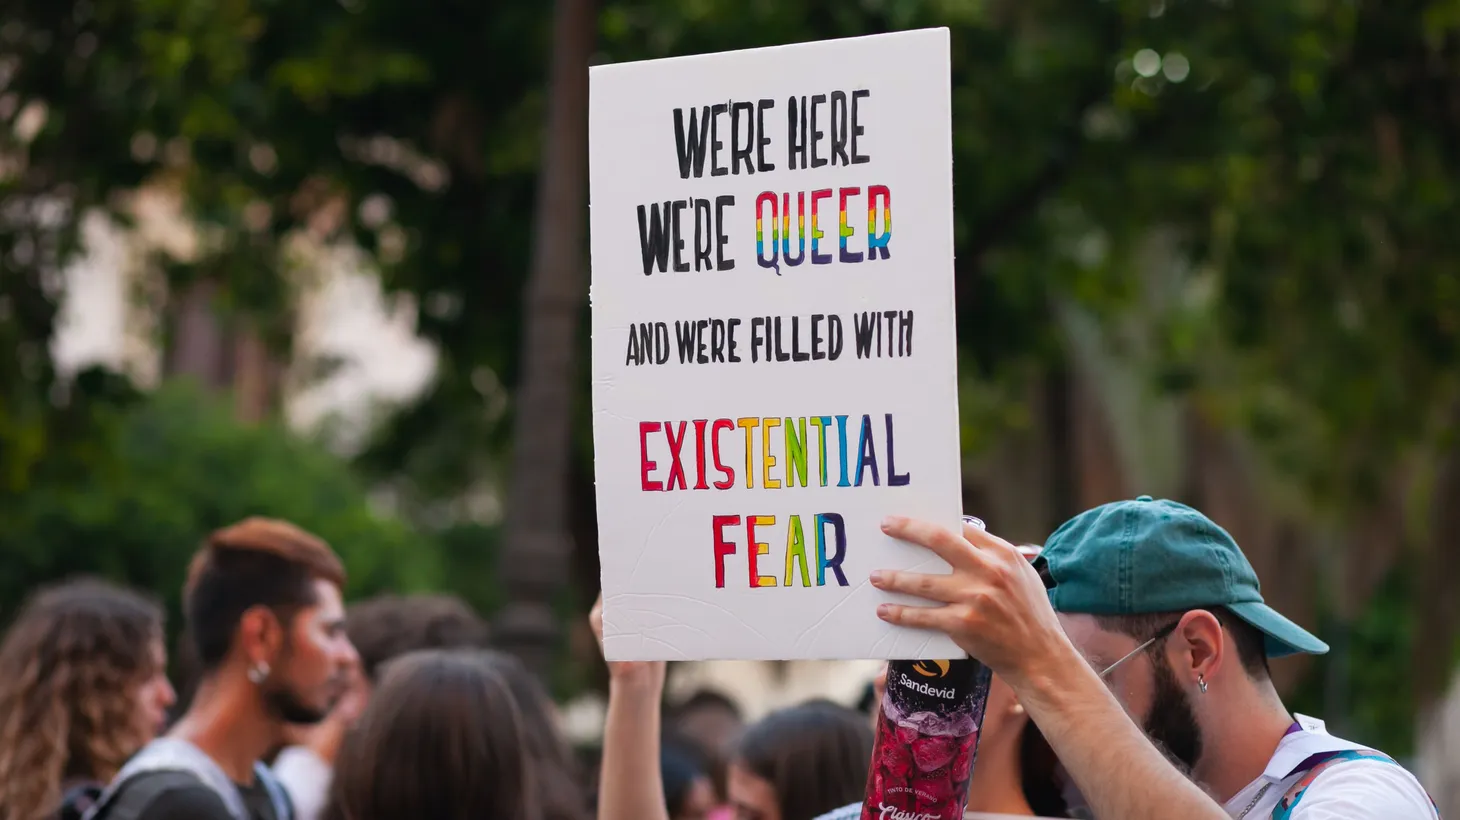 An activist holds a sign that says, “We’re here, we’re queer, and we’re filled with existential fear.”